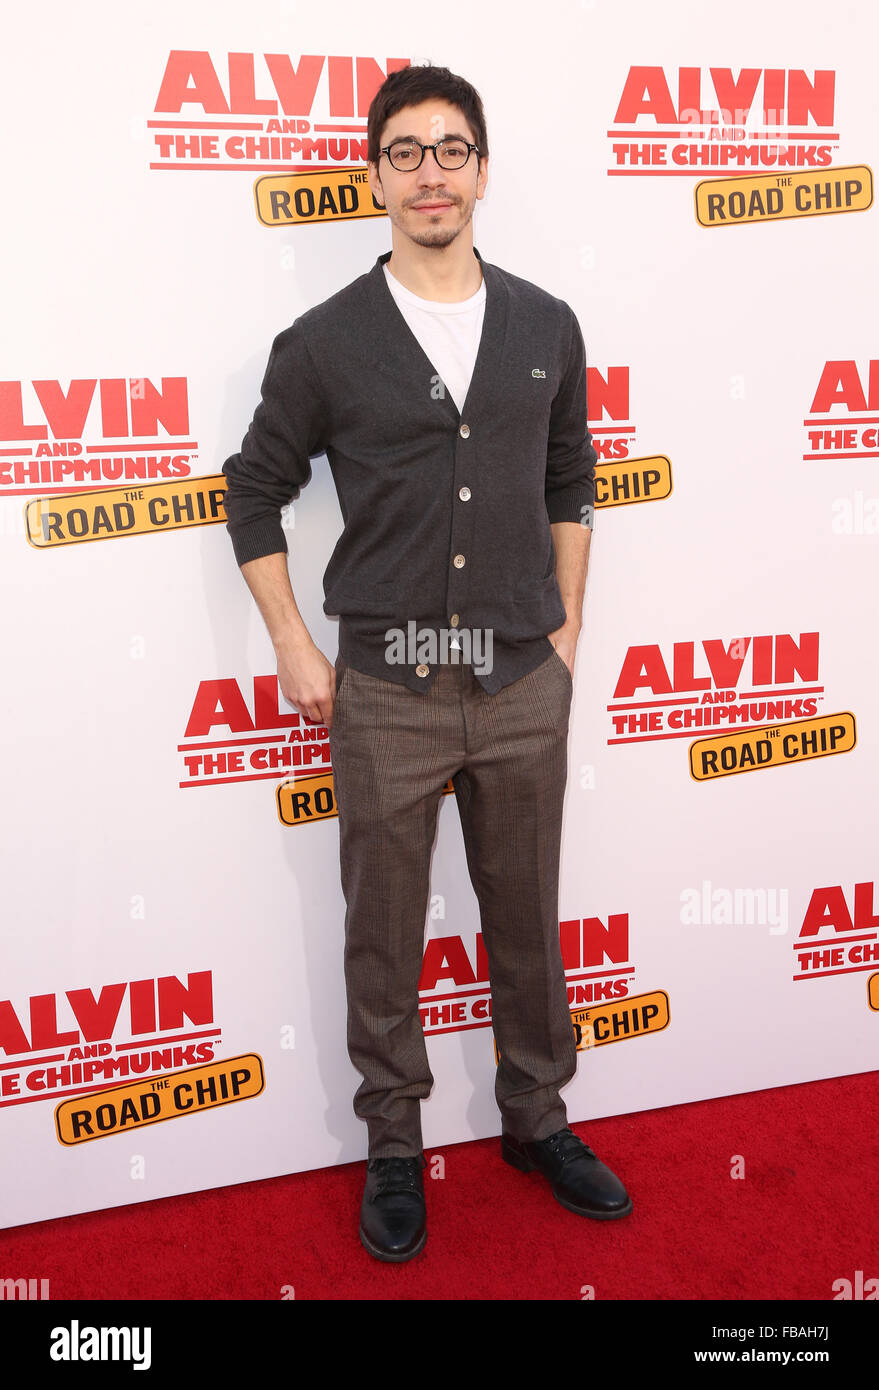 'Alvin and the Chipmunks: The Road Chip' premiere at the Darryl F. Zanuck Theatre  Featuring: Justin Long Where: Los Angeles, California, United States When: 12 Dec 2015 Stock Photo